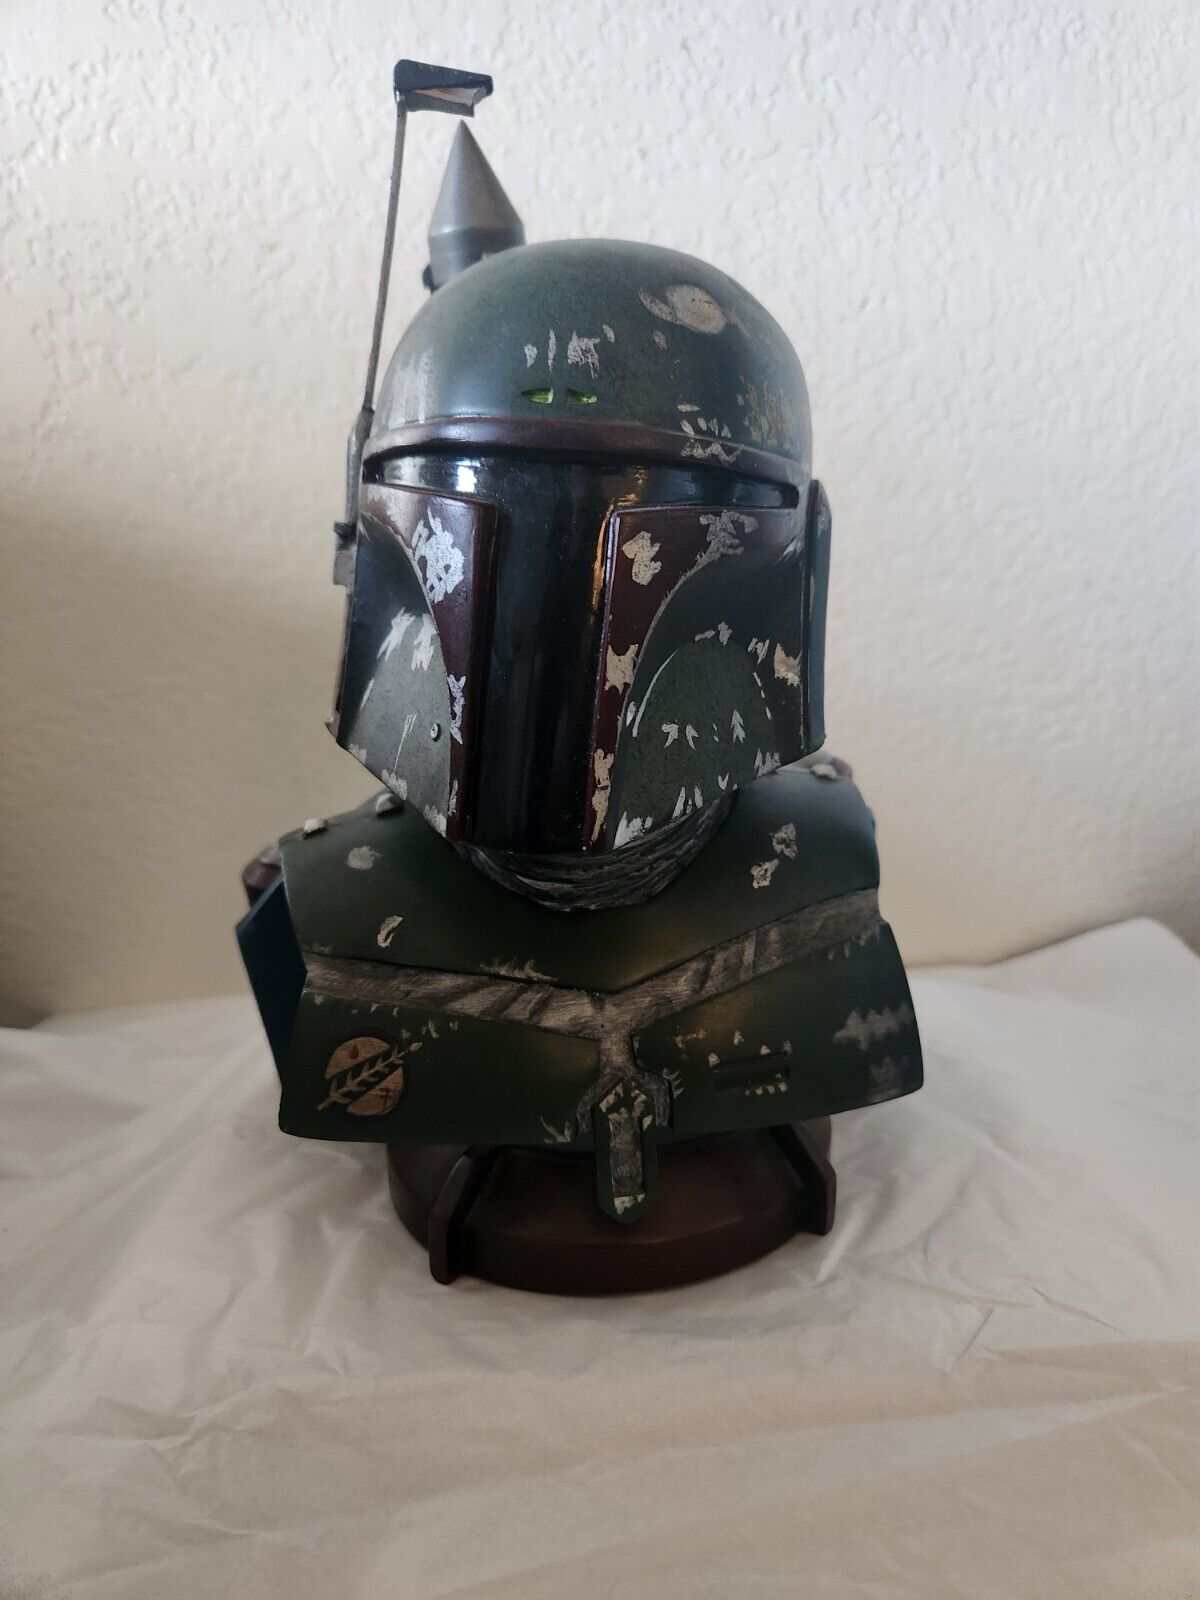 Legends In 3Dimensions Star Wars Boba Fett Bust 1997 Limited Edition 3779/5000